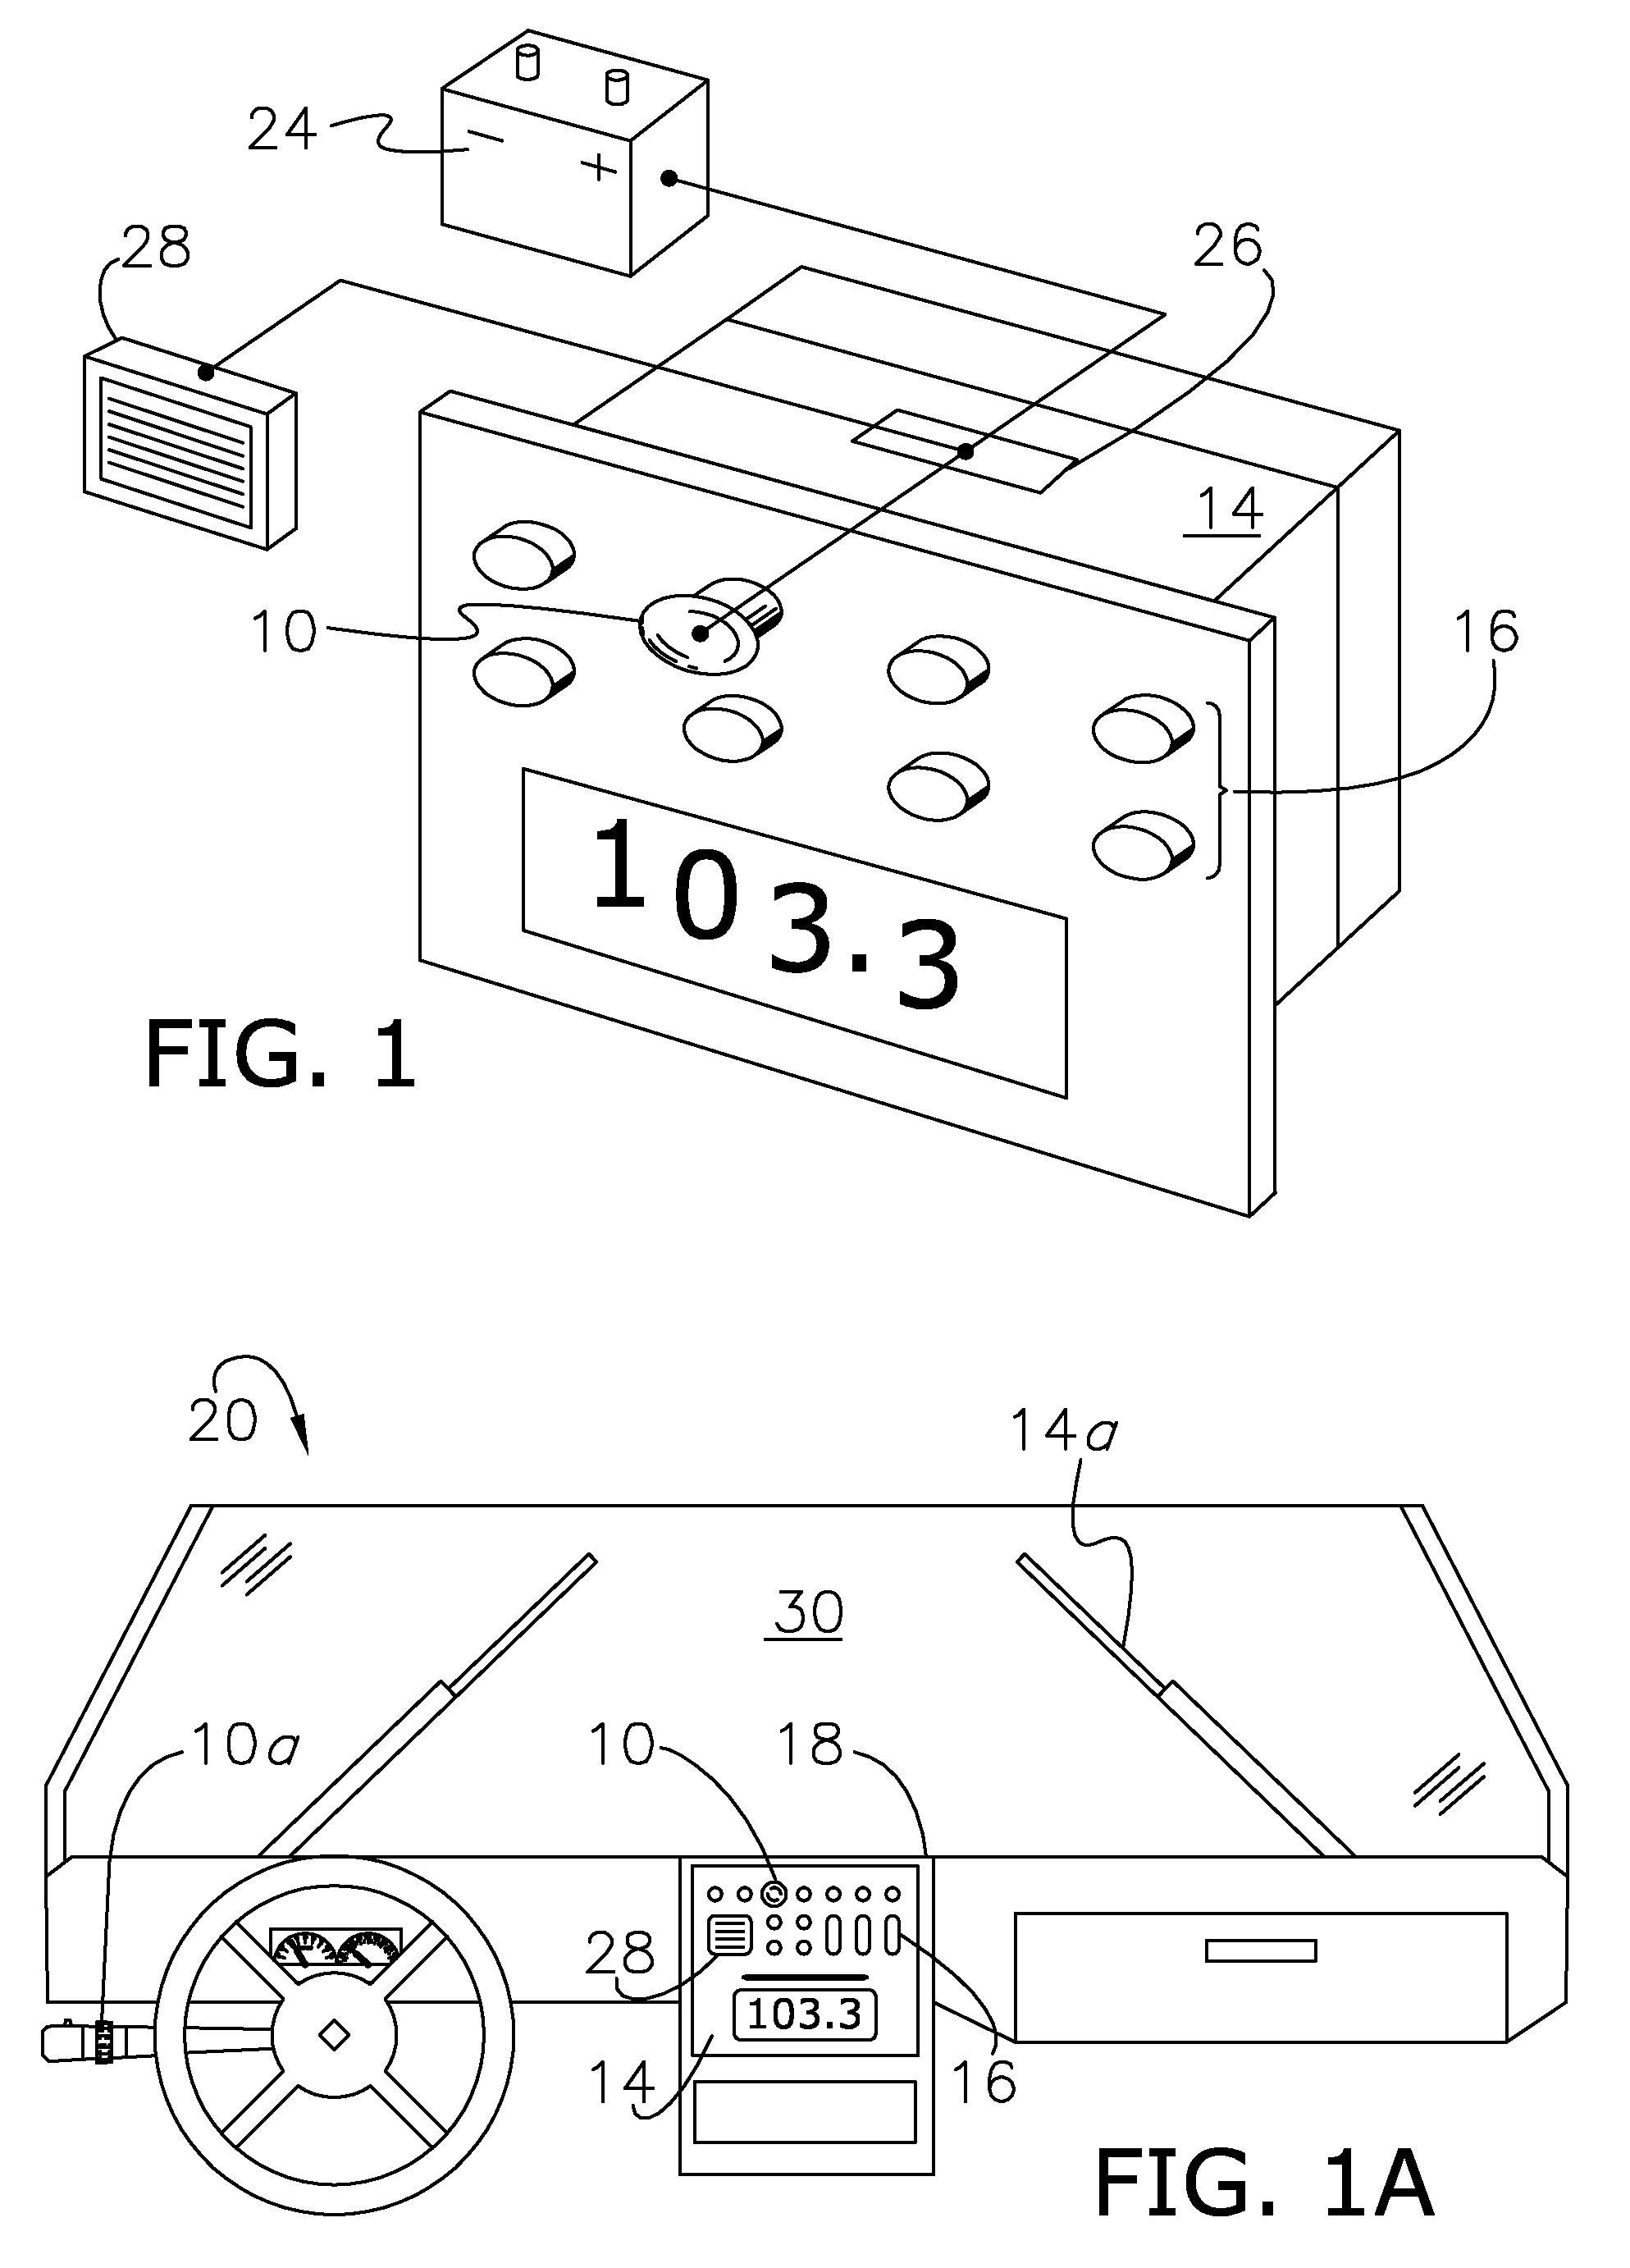 Reconfigurable tactile interface utilizing active material actuation